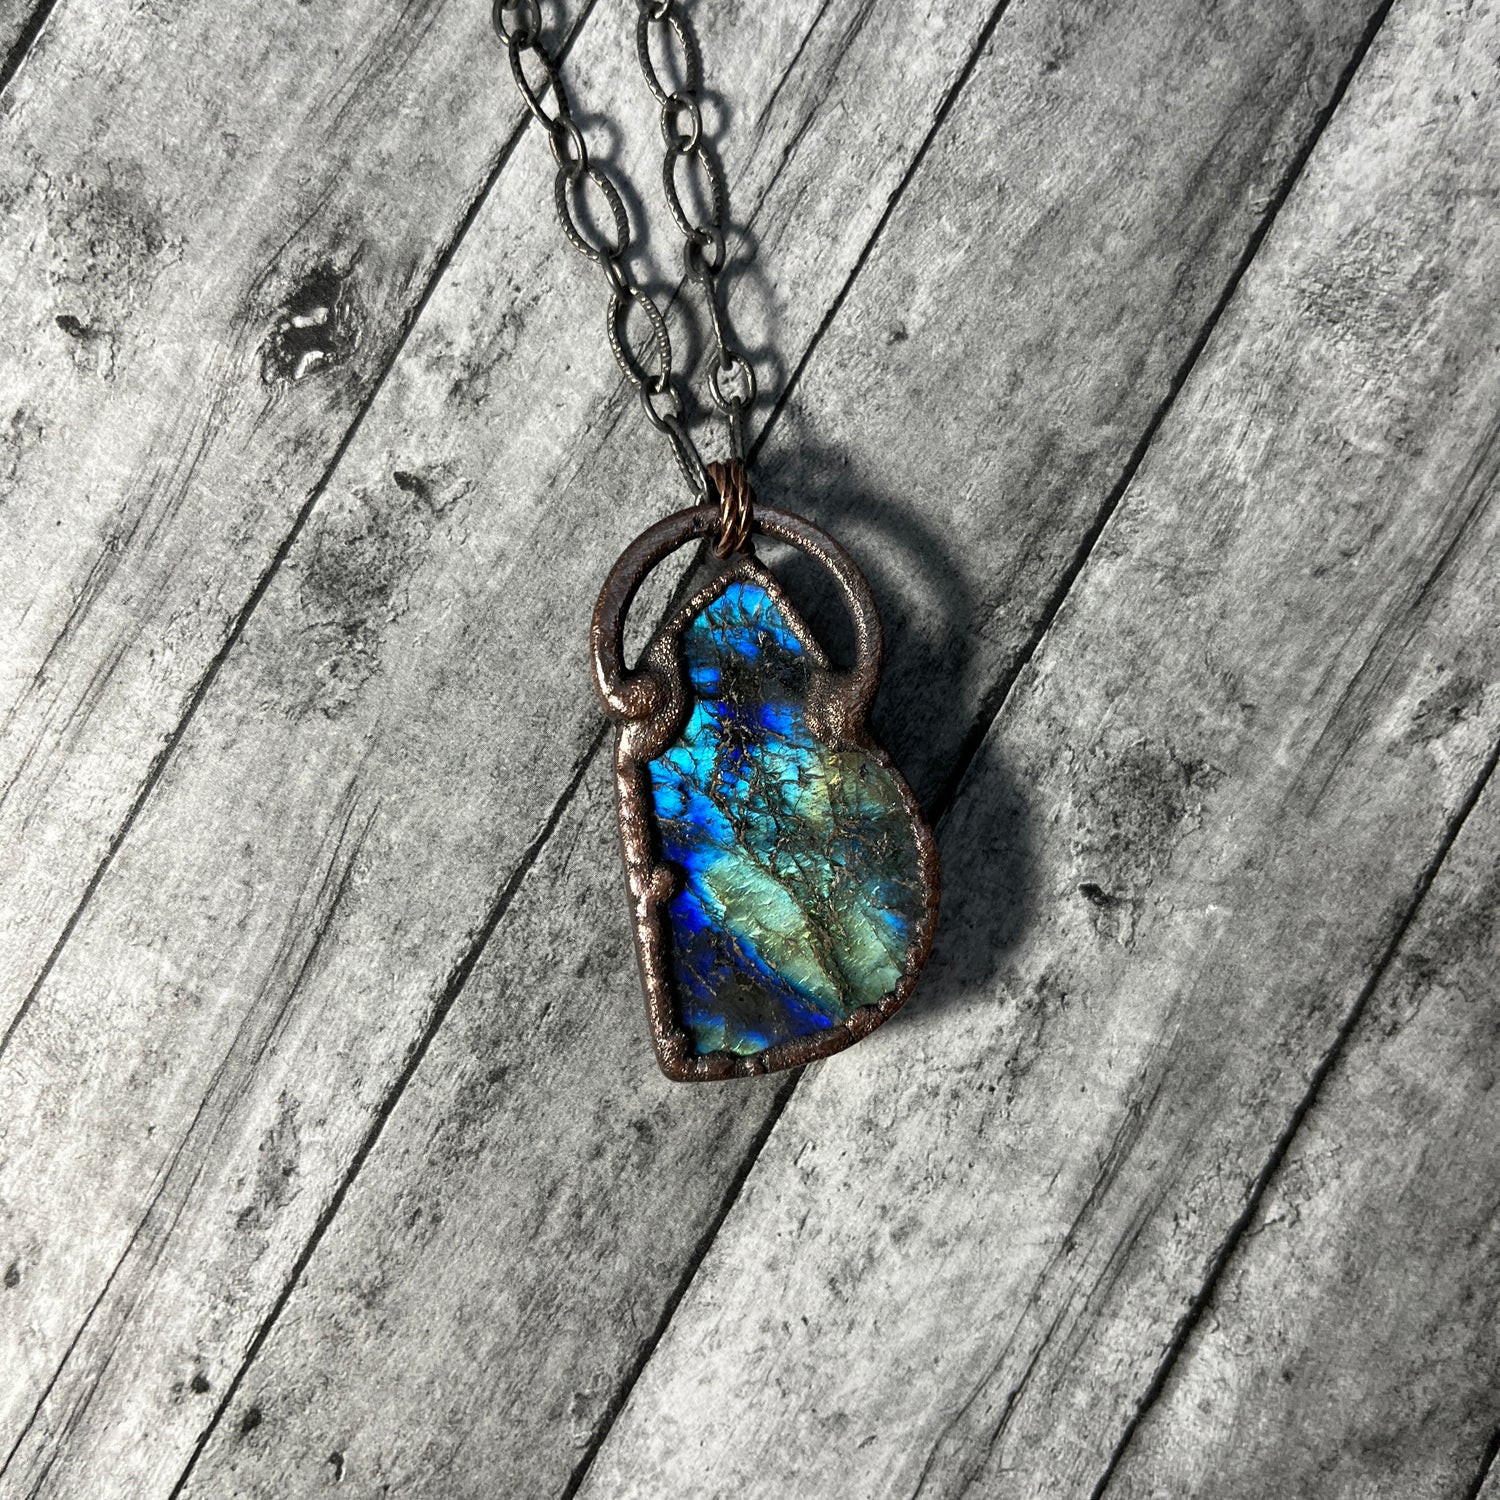 the back flash of blue in the labradorite crystal stone.